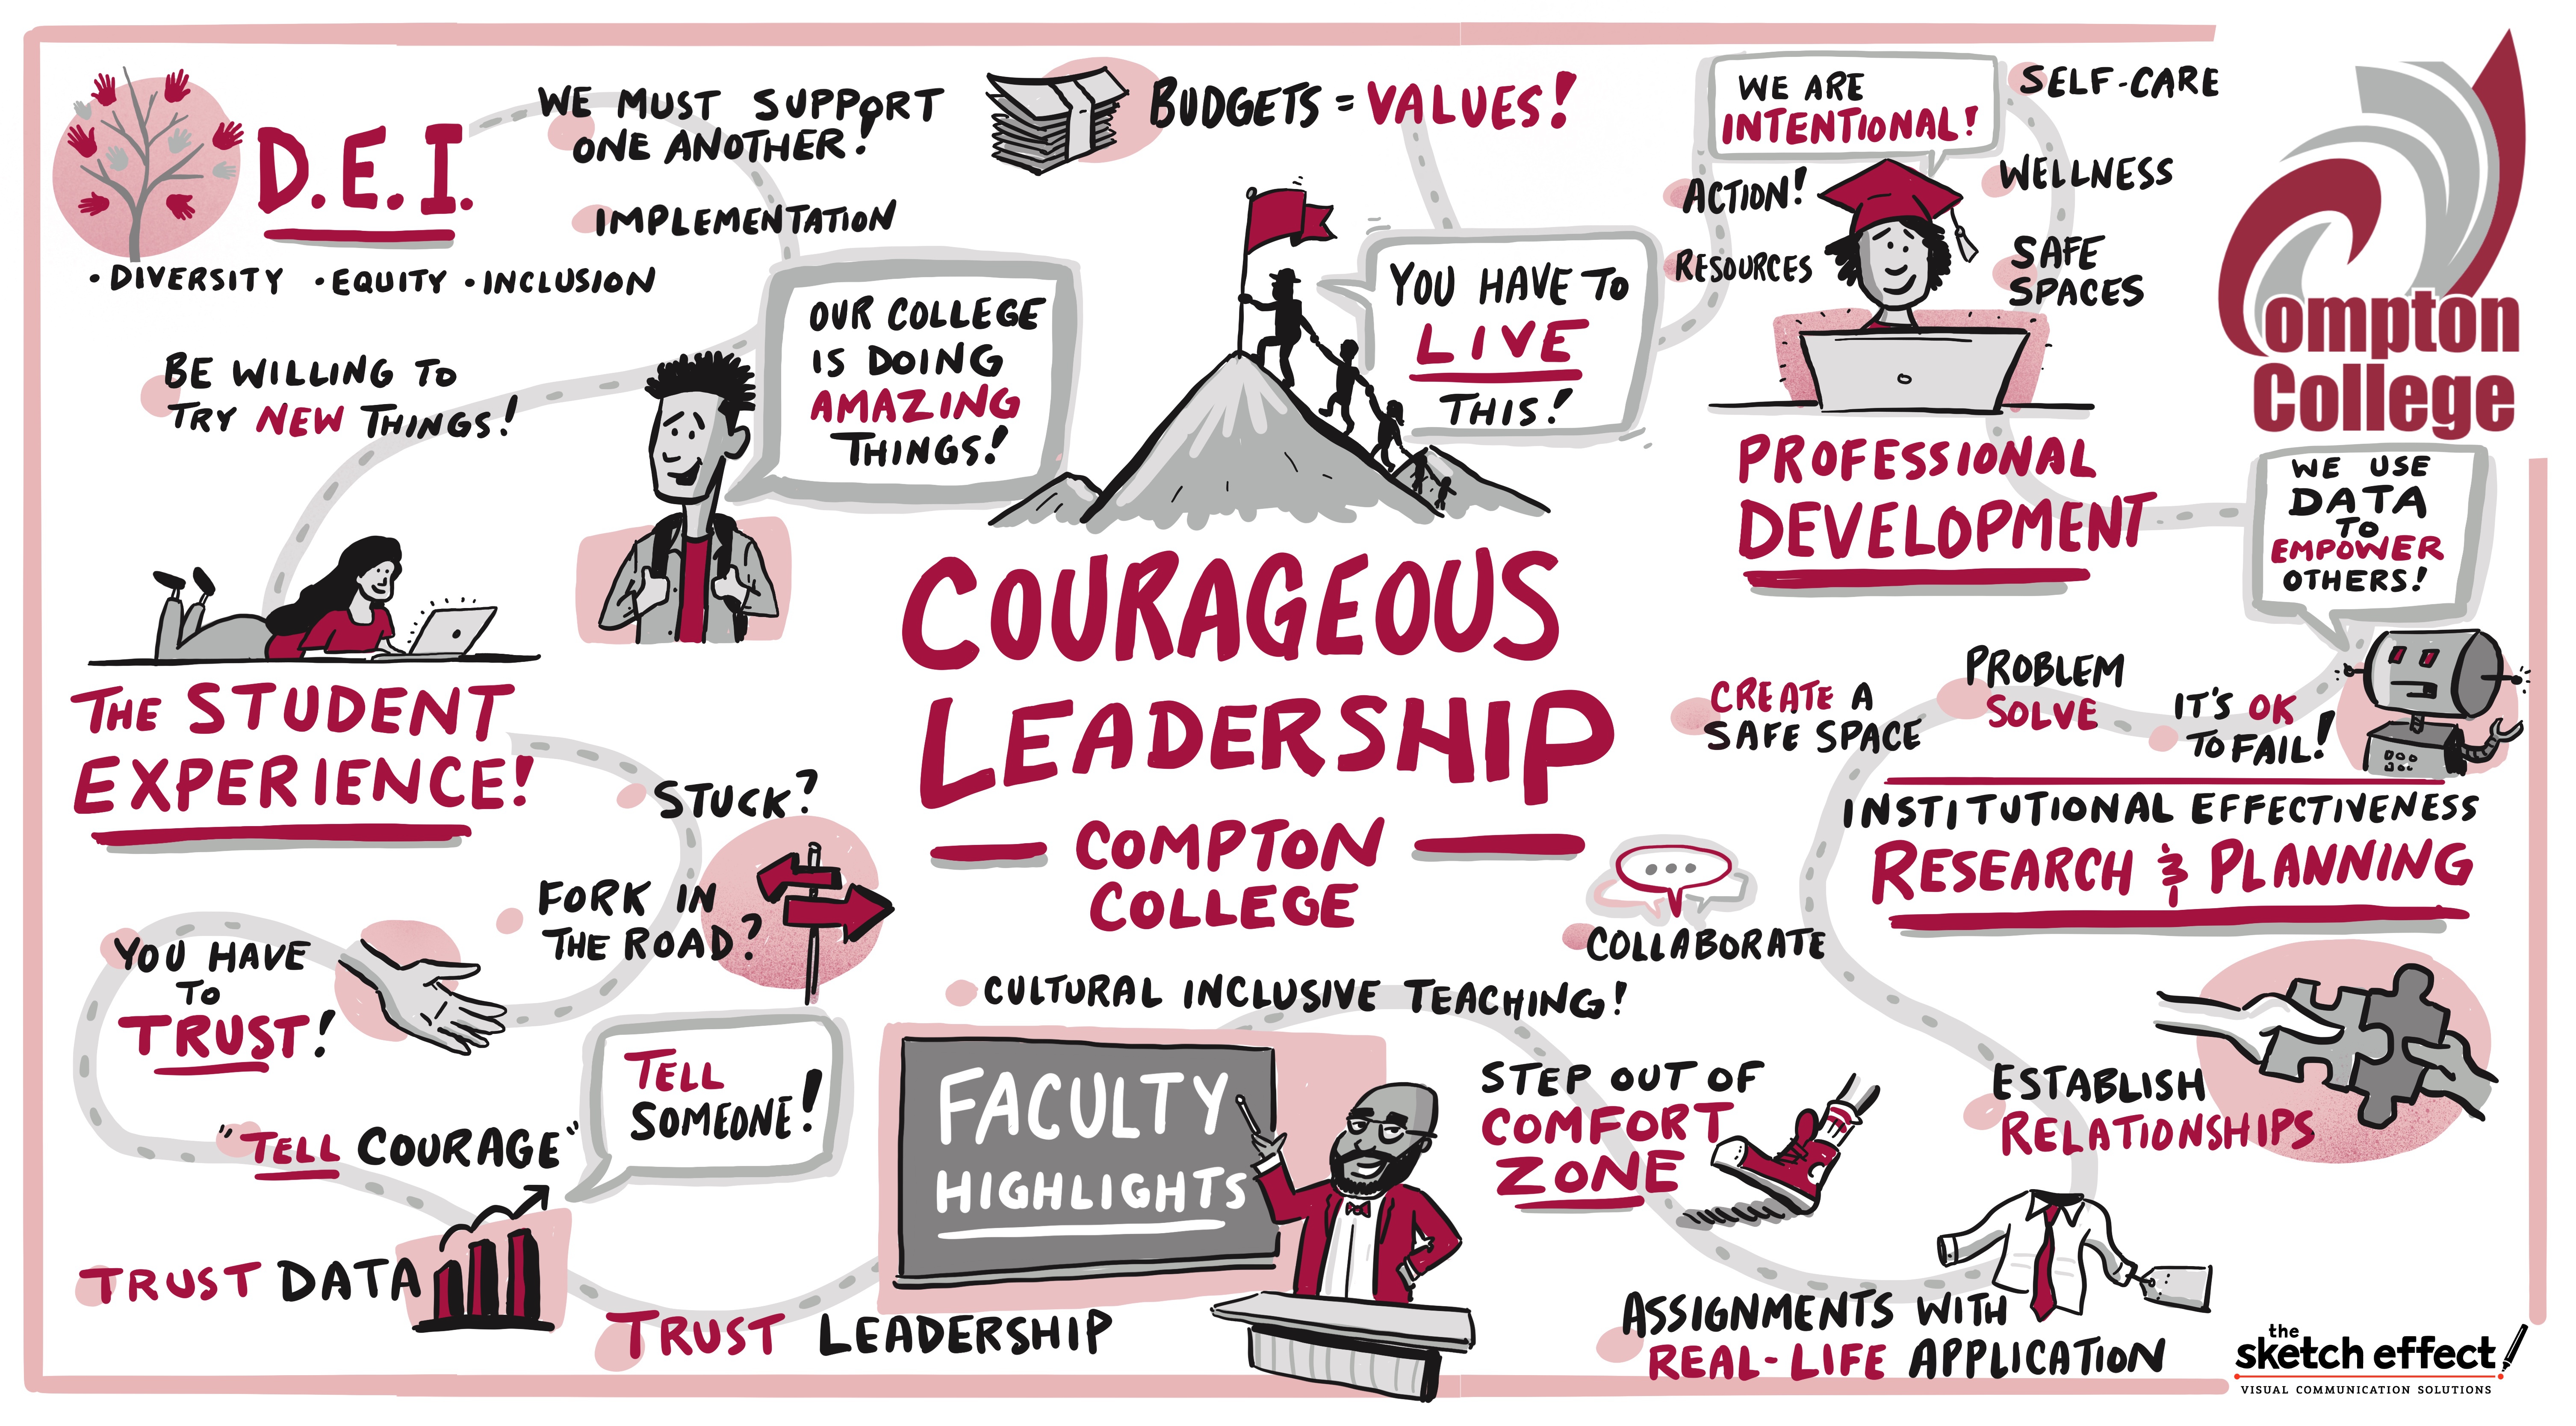 The Sketch Effect Compton College Courageous Leadership